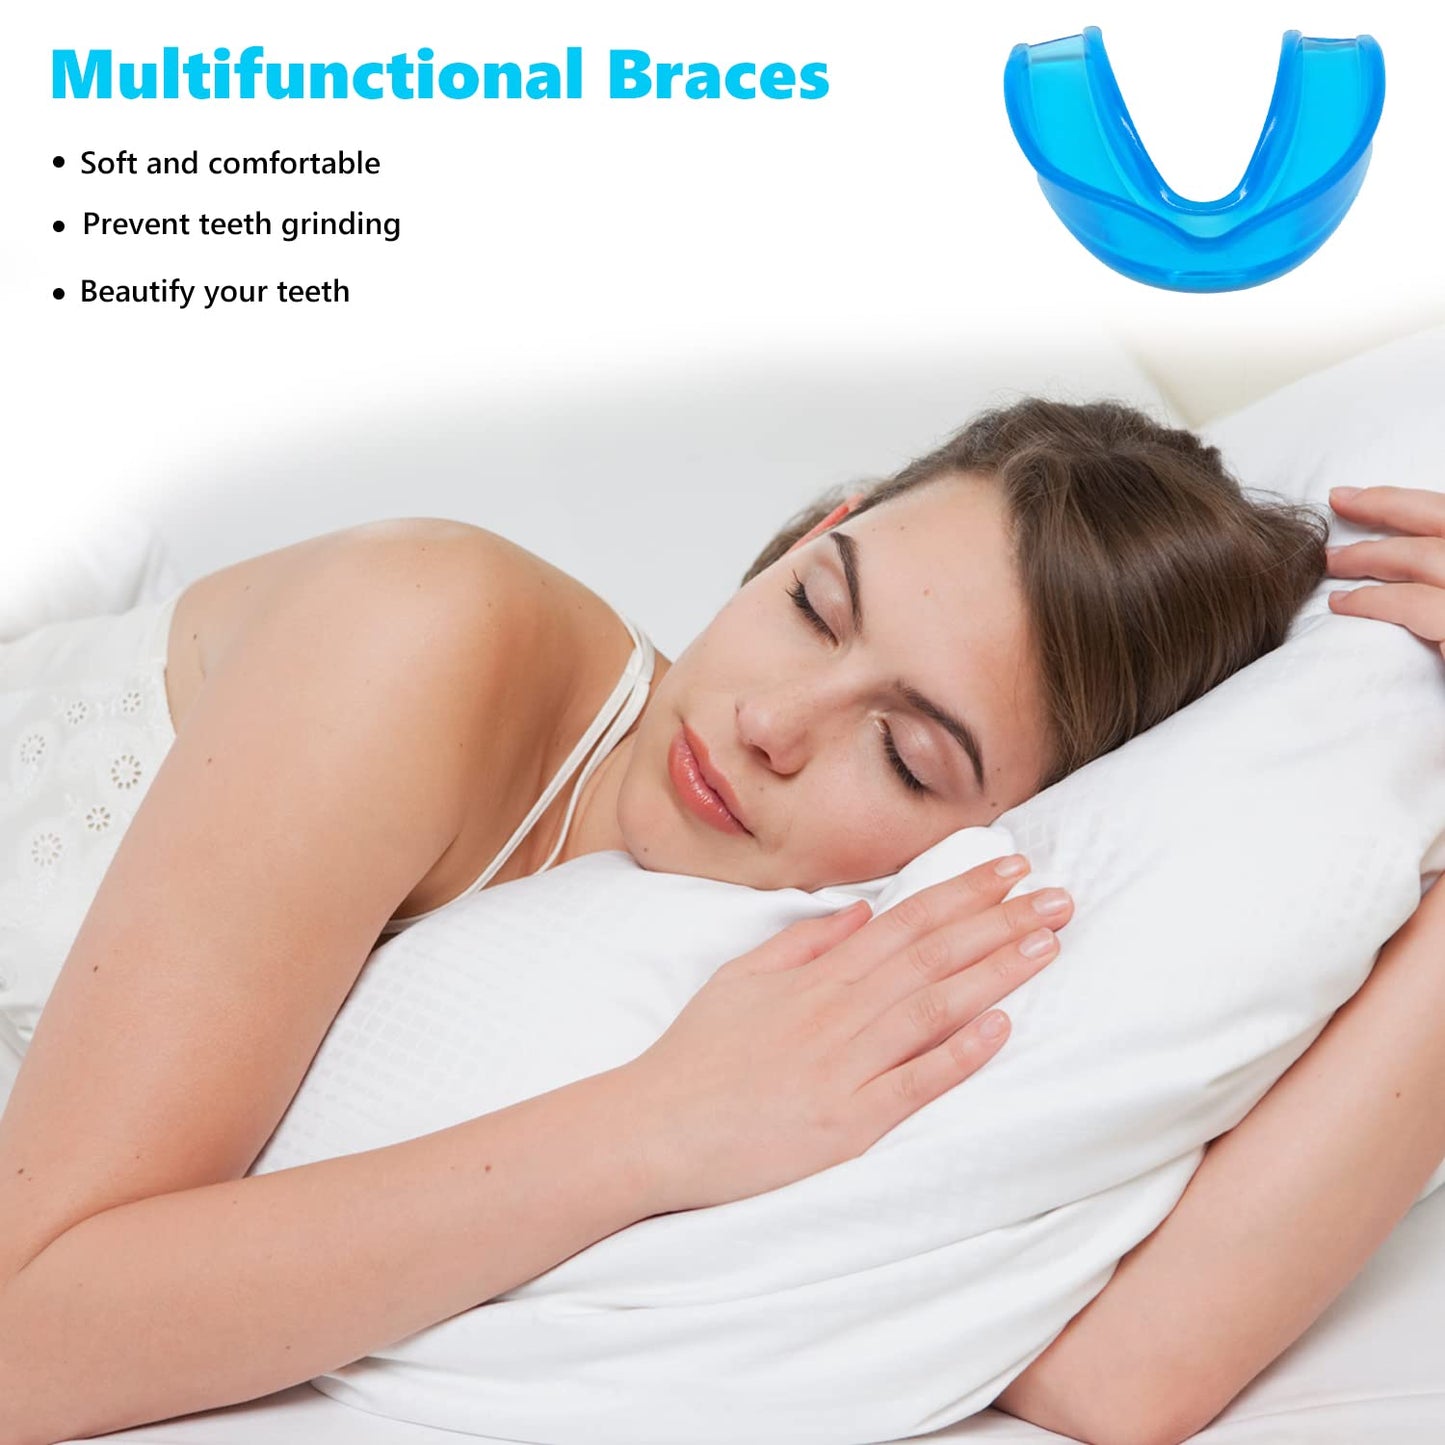 Mouth Guard for Teeth Grinding, 4PCS Reusable Teeth Grinding Guard and Improve Sleep Quality, Mouth Guard for Grinding Teeth and Clenching Anti Grinding Teeth Y4-HCYT